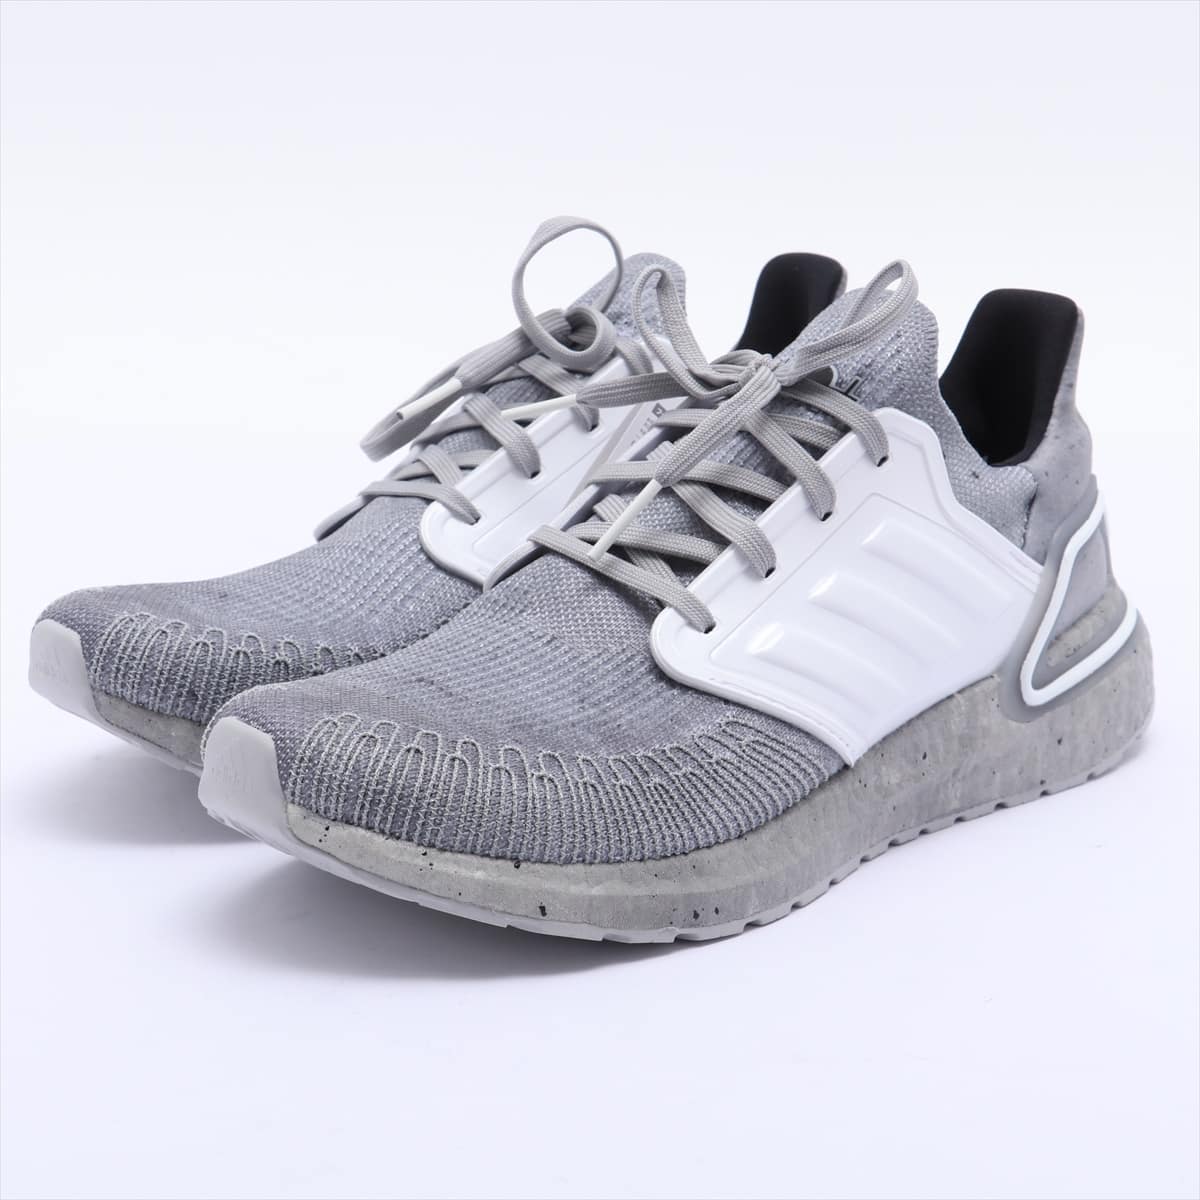 Adidas Knit Sneakers 27.0cm Men's Grey 007 James Bond Collection ULTRA BOOST 20 - No time to die Villains FY0647